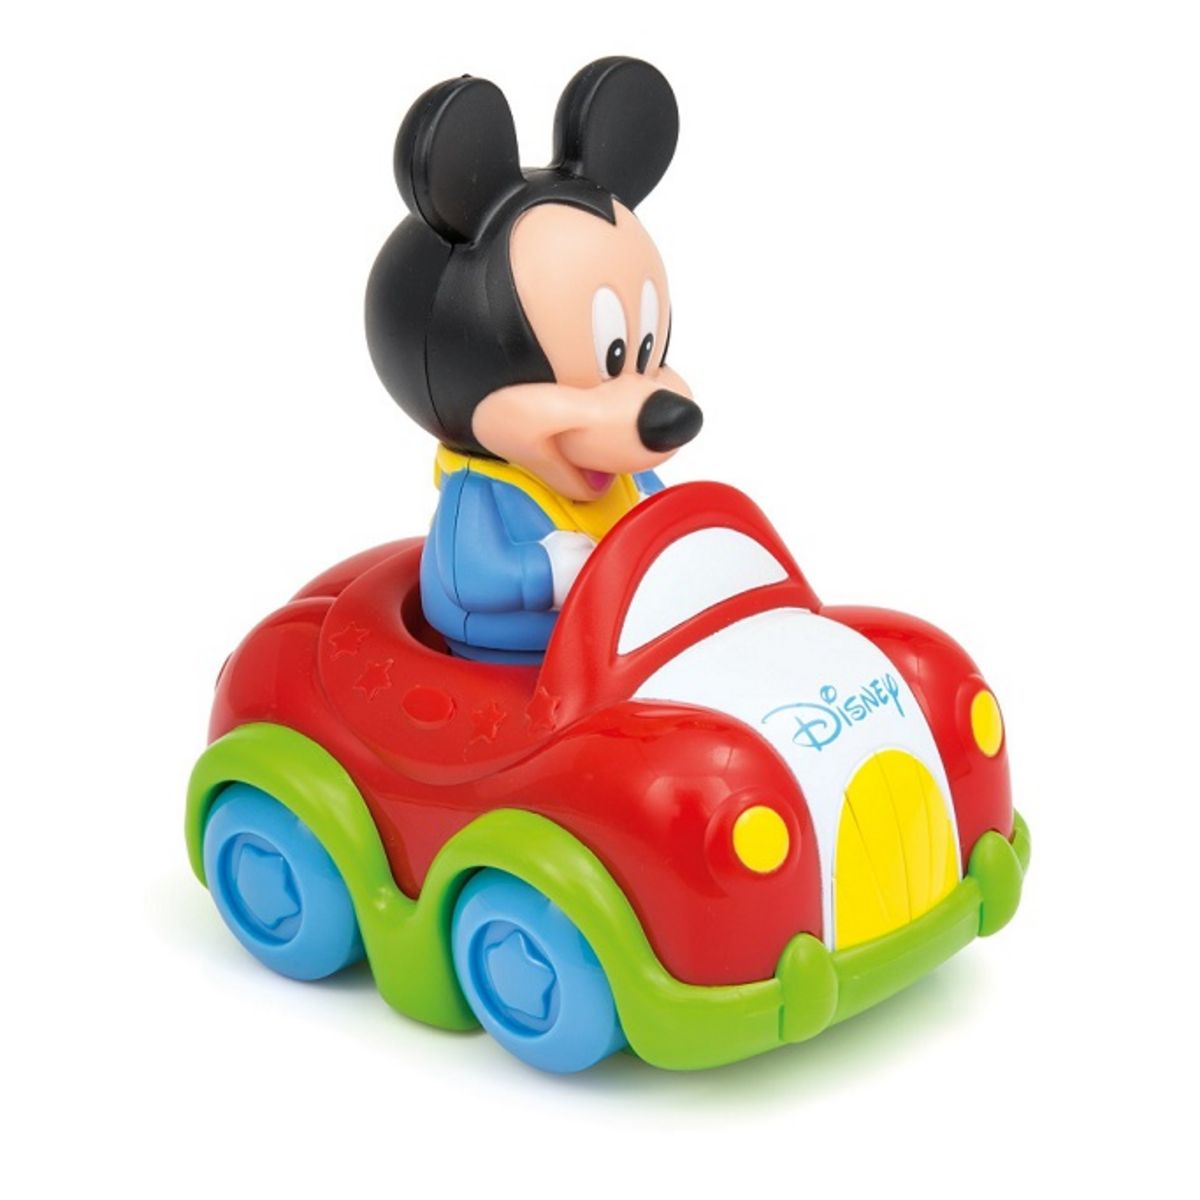 CLEMENTONI Voiture musicale Mickey pas cher 